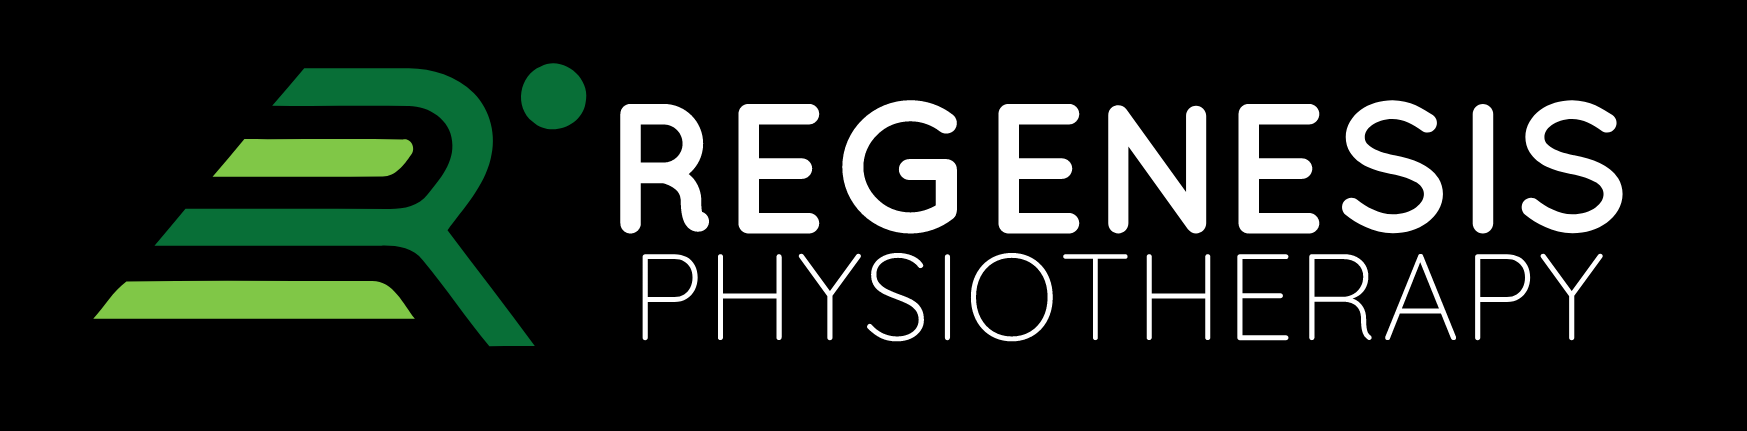 REGENESIS-Physiotherapy-logo.png